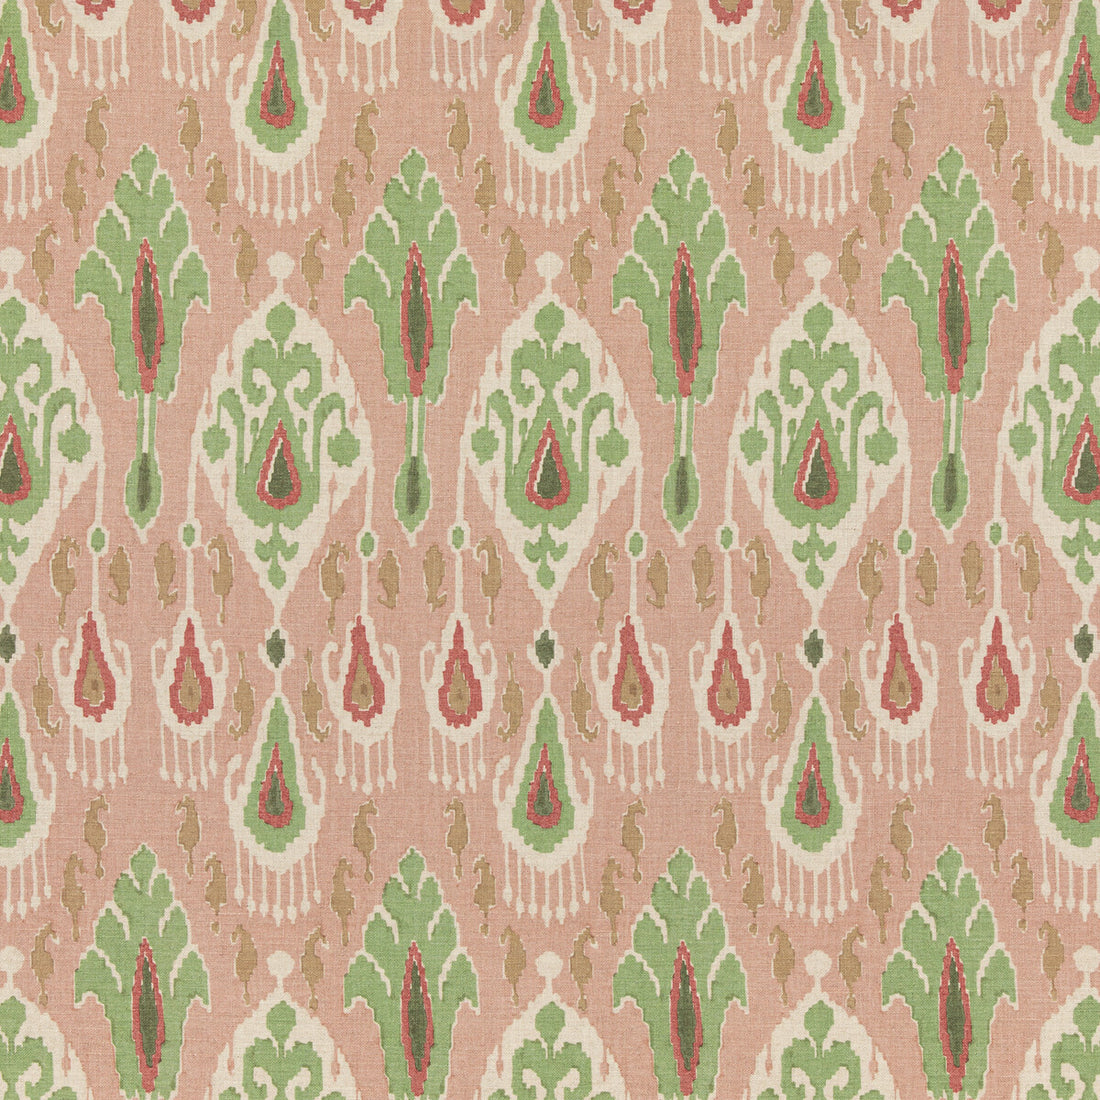 Ikat Bokhara fabric in rose/green color - pattern BP10853.4.0 - by G P &amp; J Baker in the Chifu collection